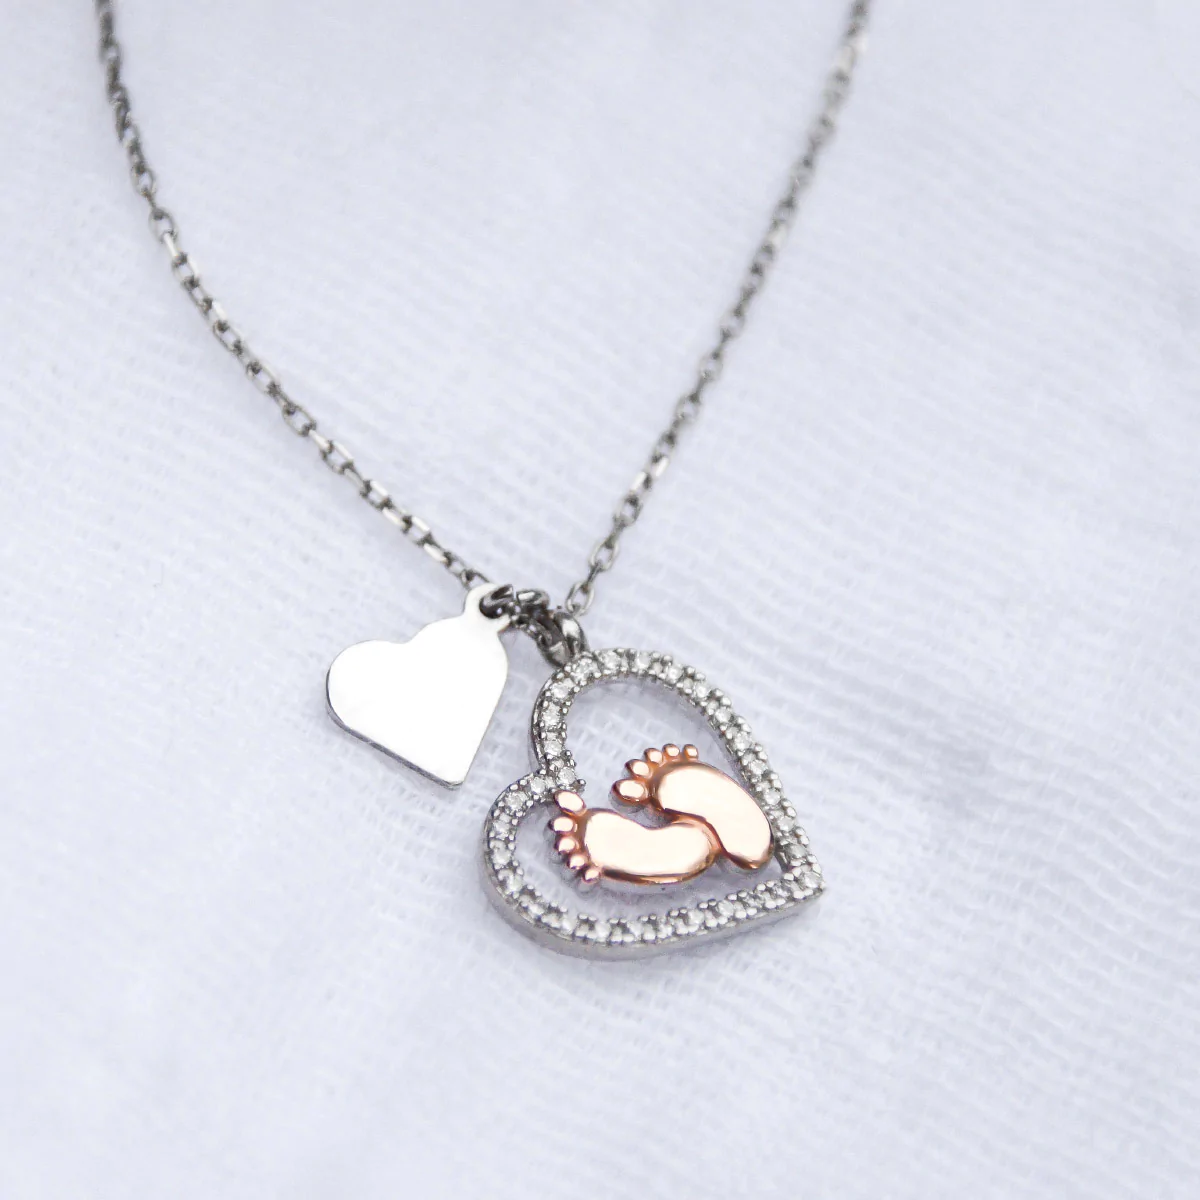 To My Darling Wife, An Amazing Mom - Baby Feet Heart Necklace Gift Set